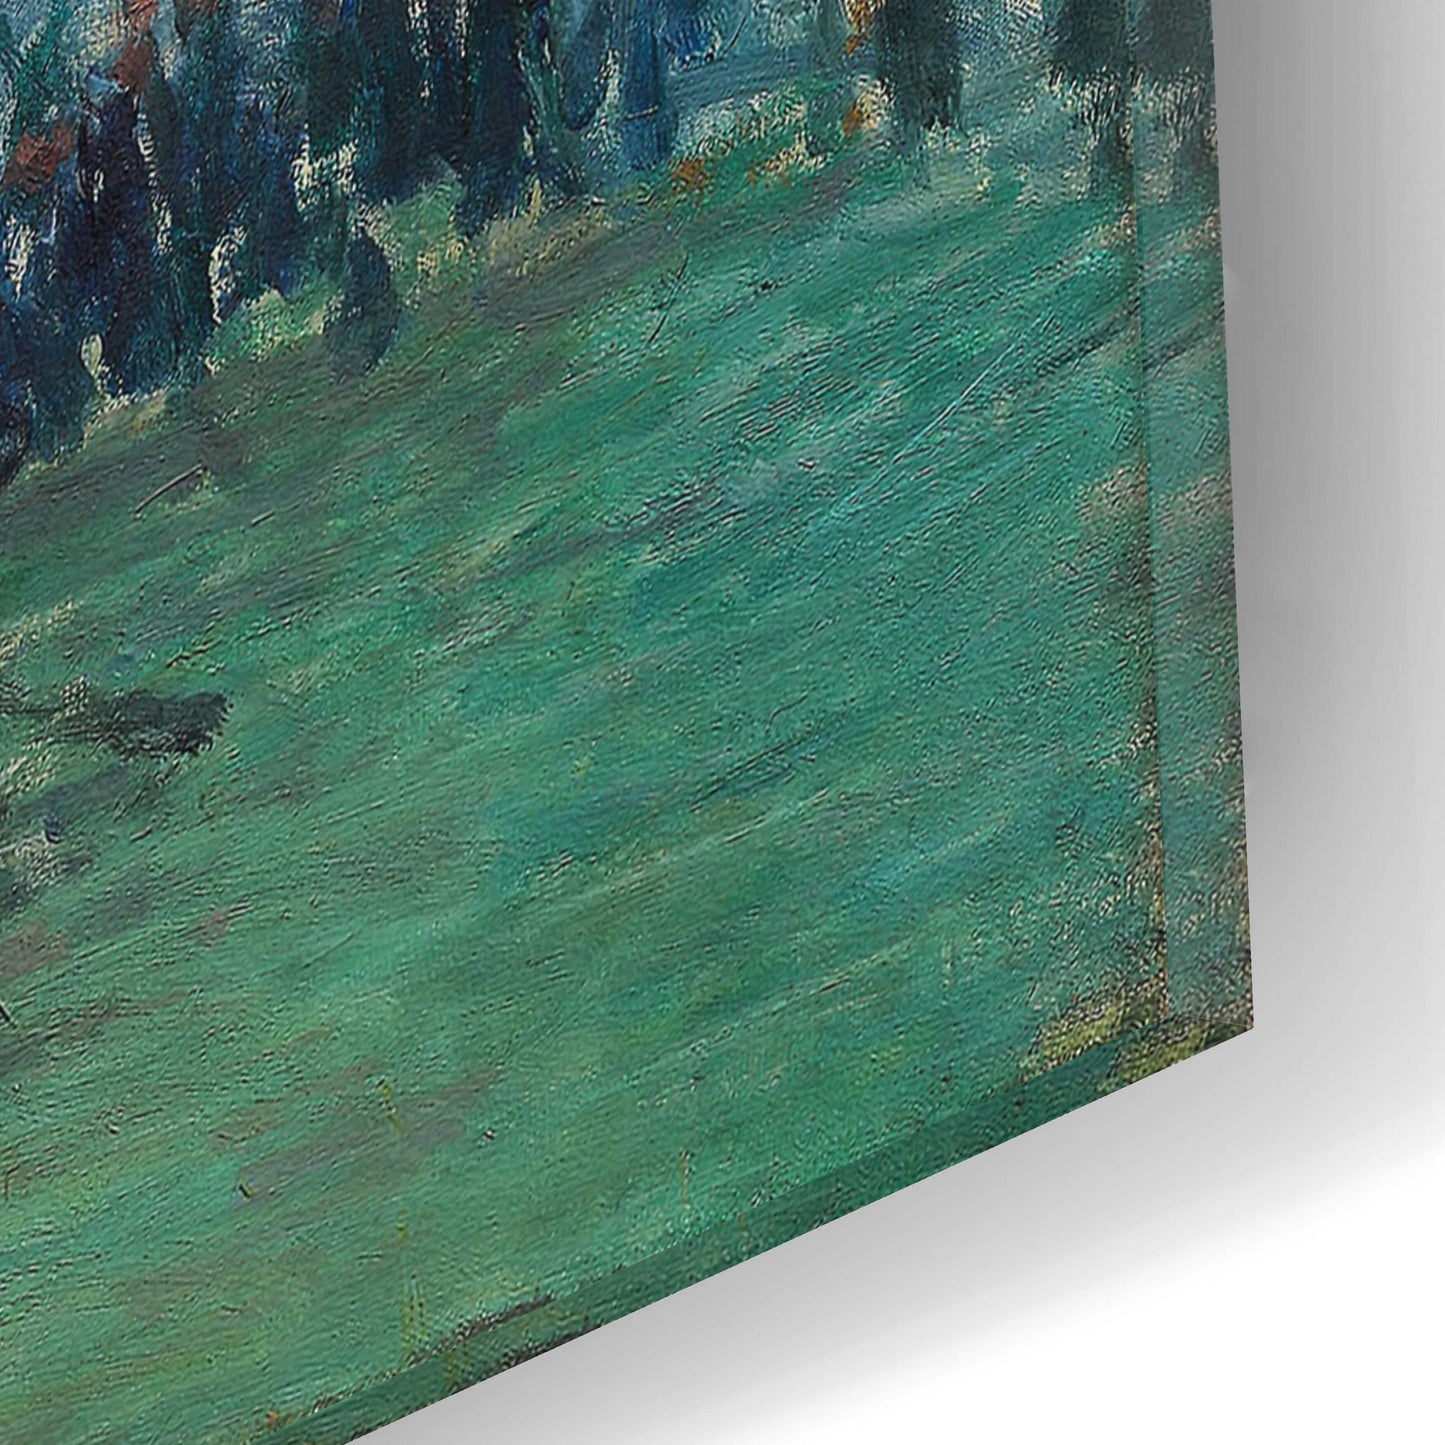 Epic Art 'Ariival Of The Normandy Train' by Claude Monet, Acrylic Glass Wall Art,16x12